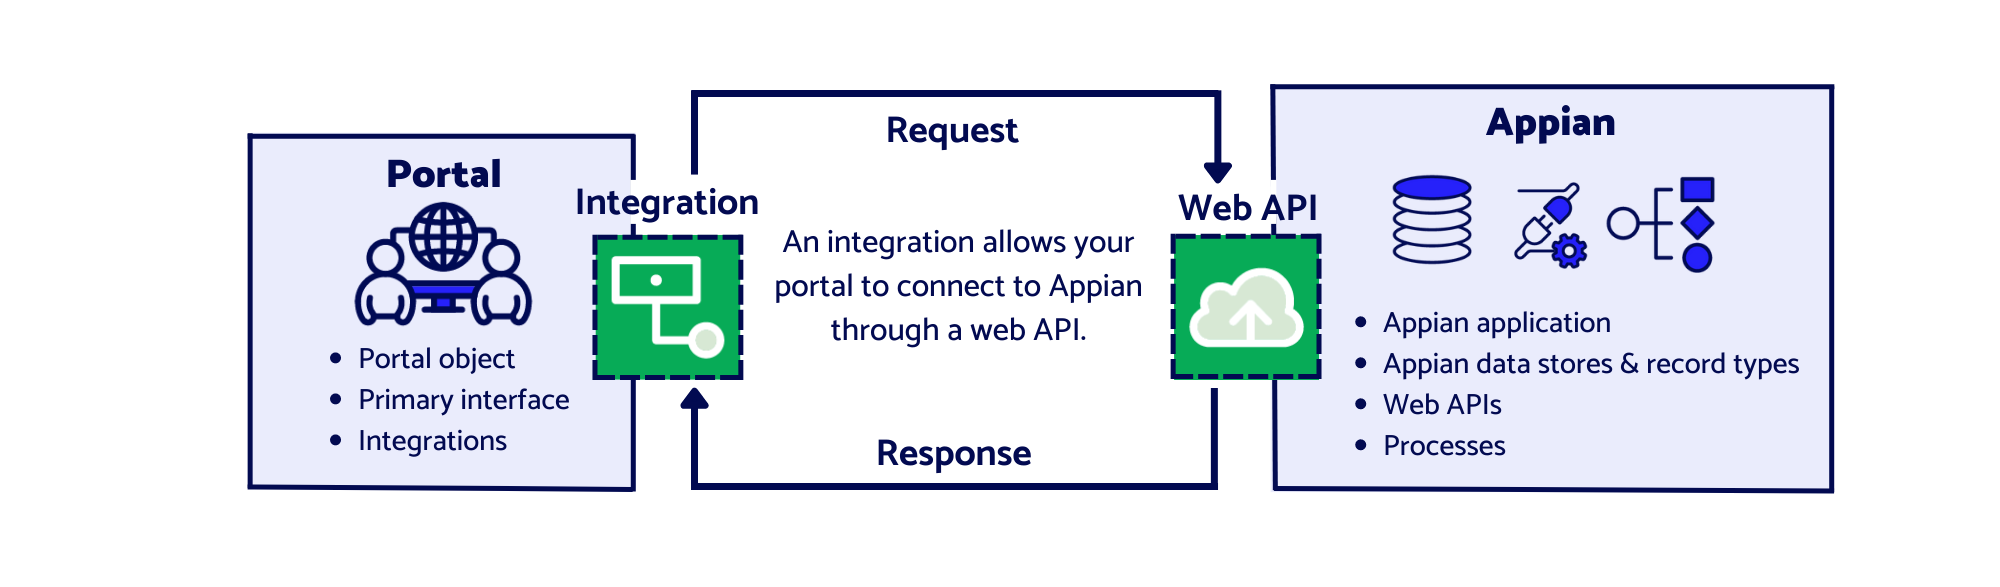 diagram of the Portals architecture, depicting the connection between the portal and the Appian applications described above